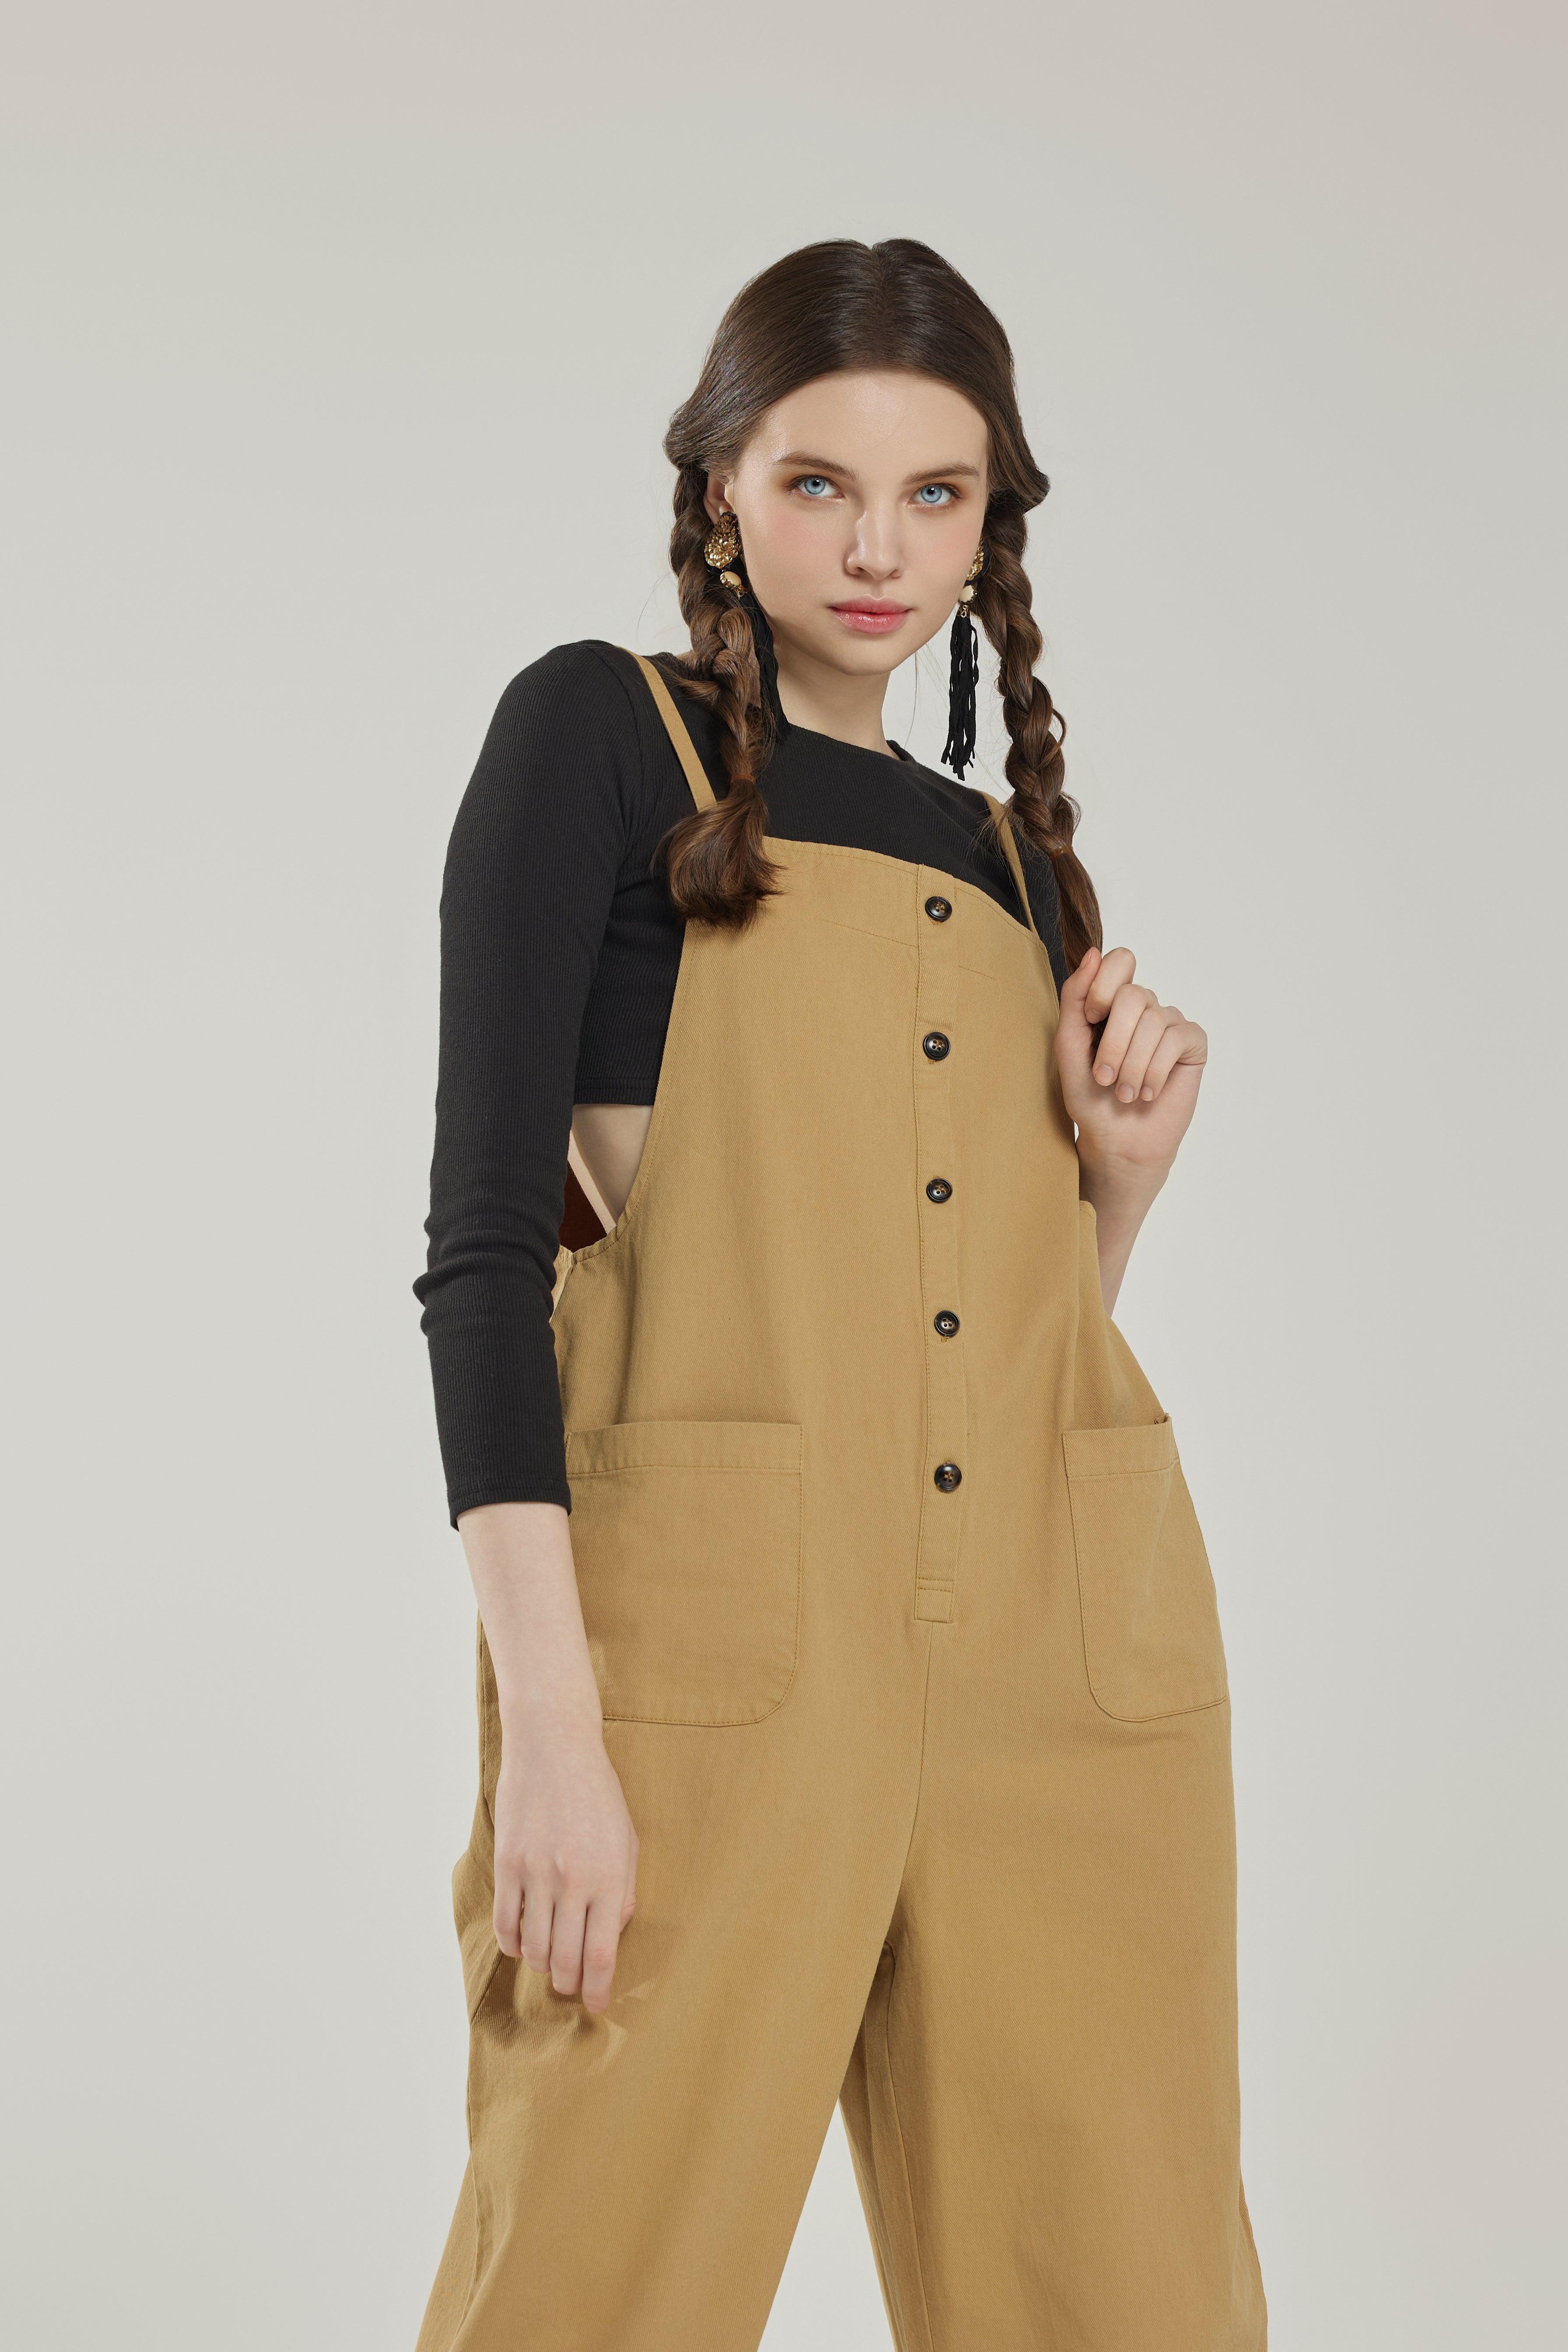 100% cotton Button Down Sleeveless Overalls Jumpsuit with Pockets - Sand - noflik